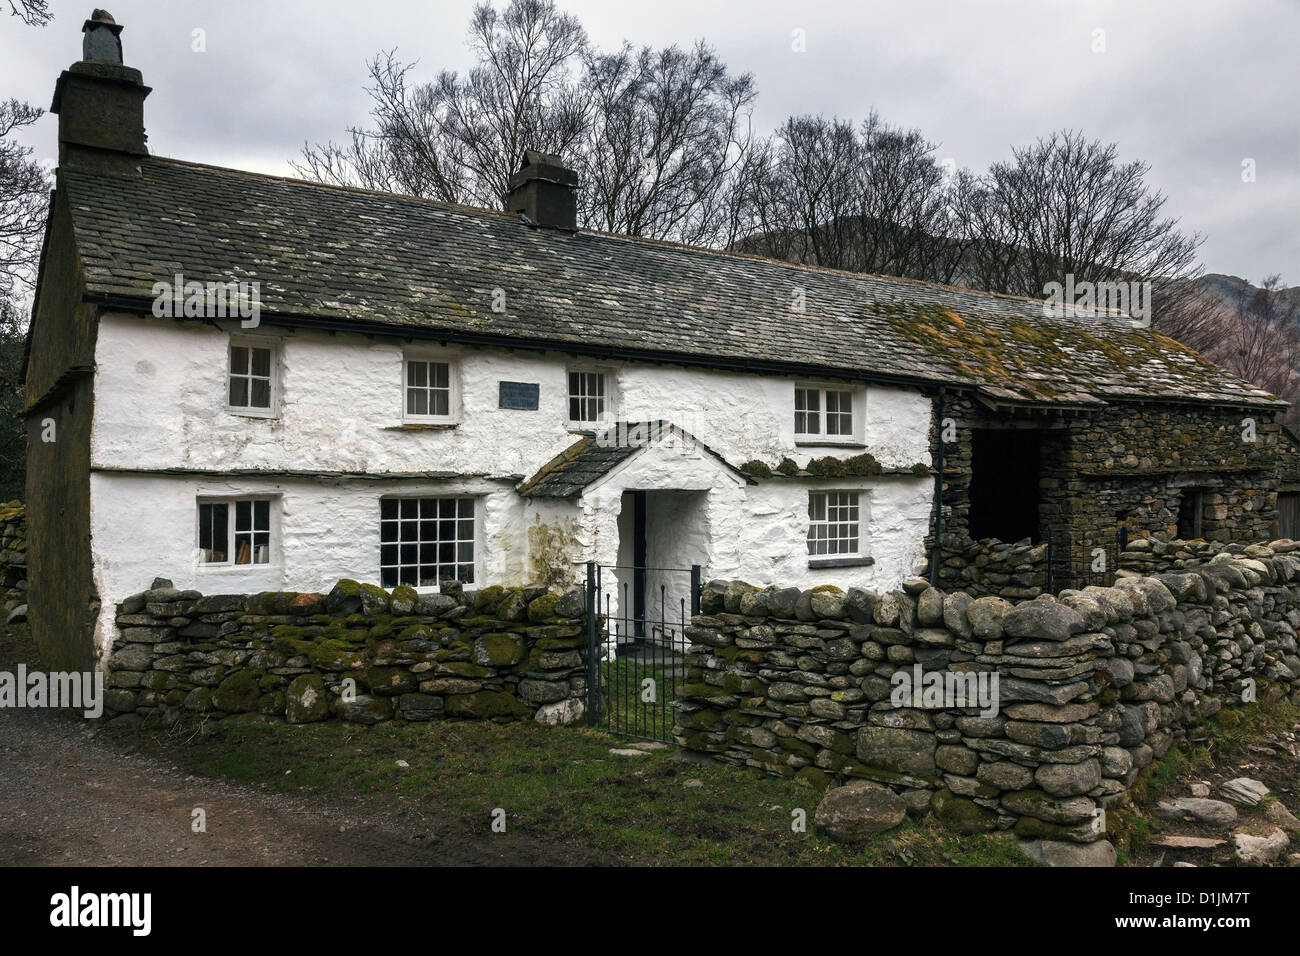 Old white washed farm cottage with slate roof and adjoining barn, Bridge End Cottage Farm,Little Langdale, Cumbria, England, UK Stock Photo